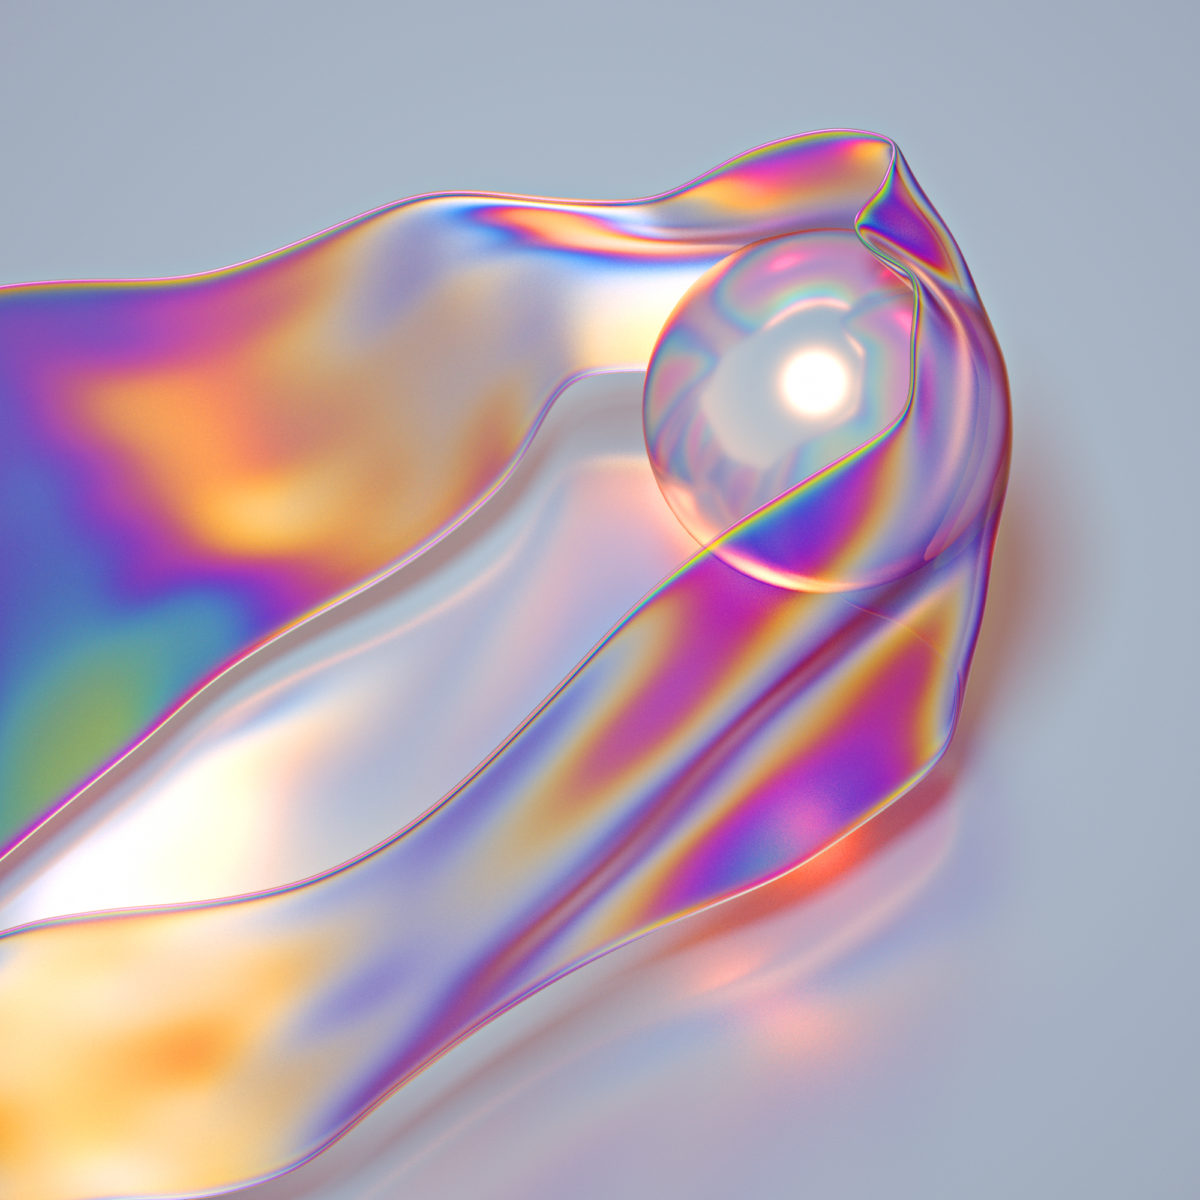 Translucent Iridescent - A digital art and motion graphic series by Machineast digital artist duo in Singapore.